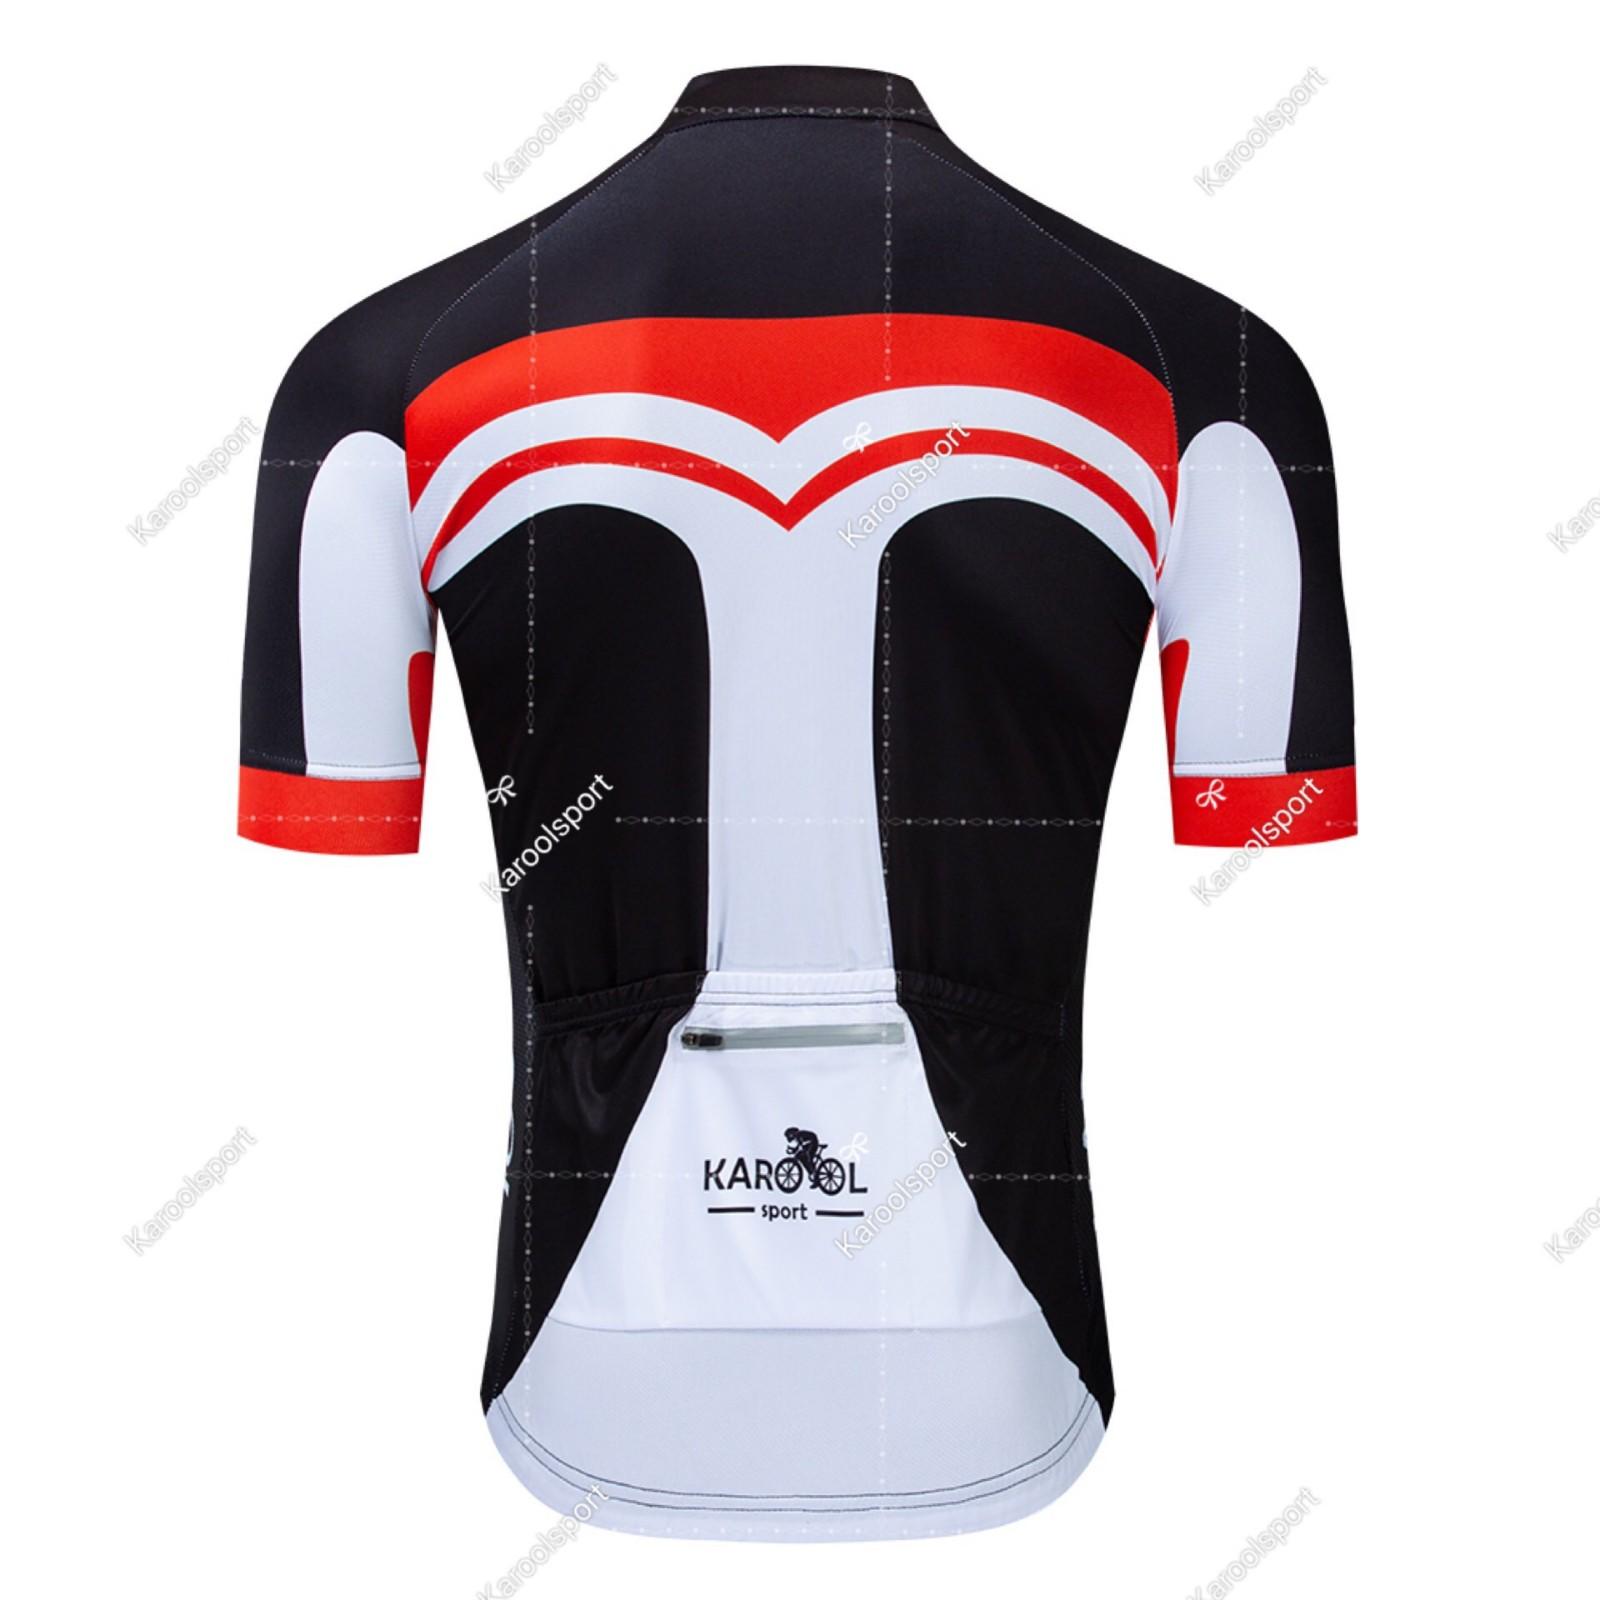 Karool comfortable team cycling jerseys directly sale for sporting-3